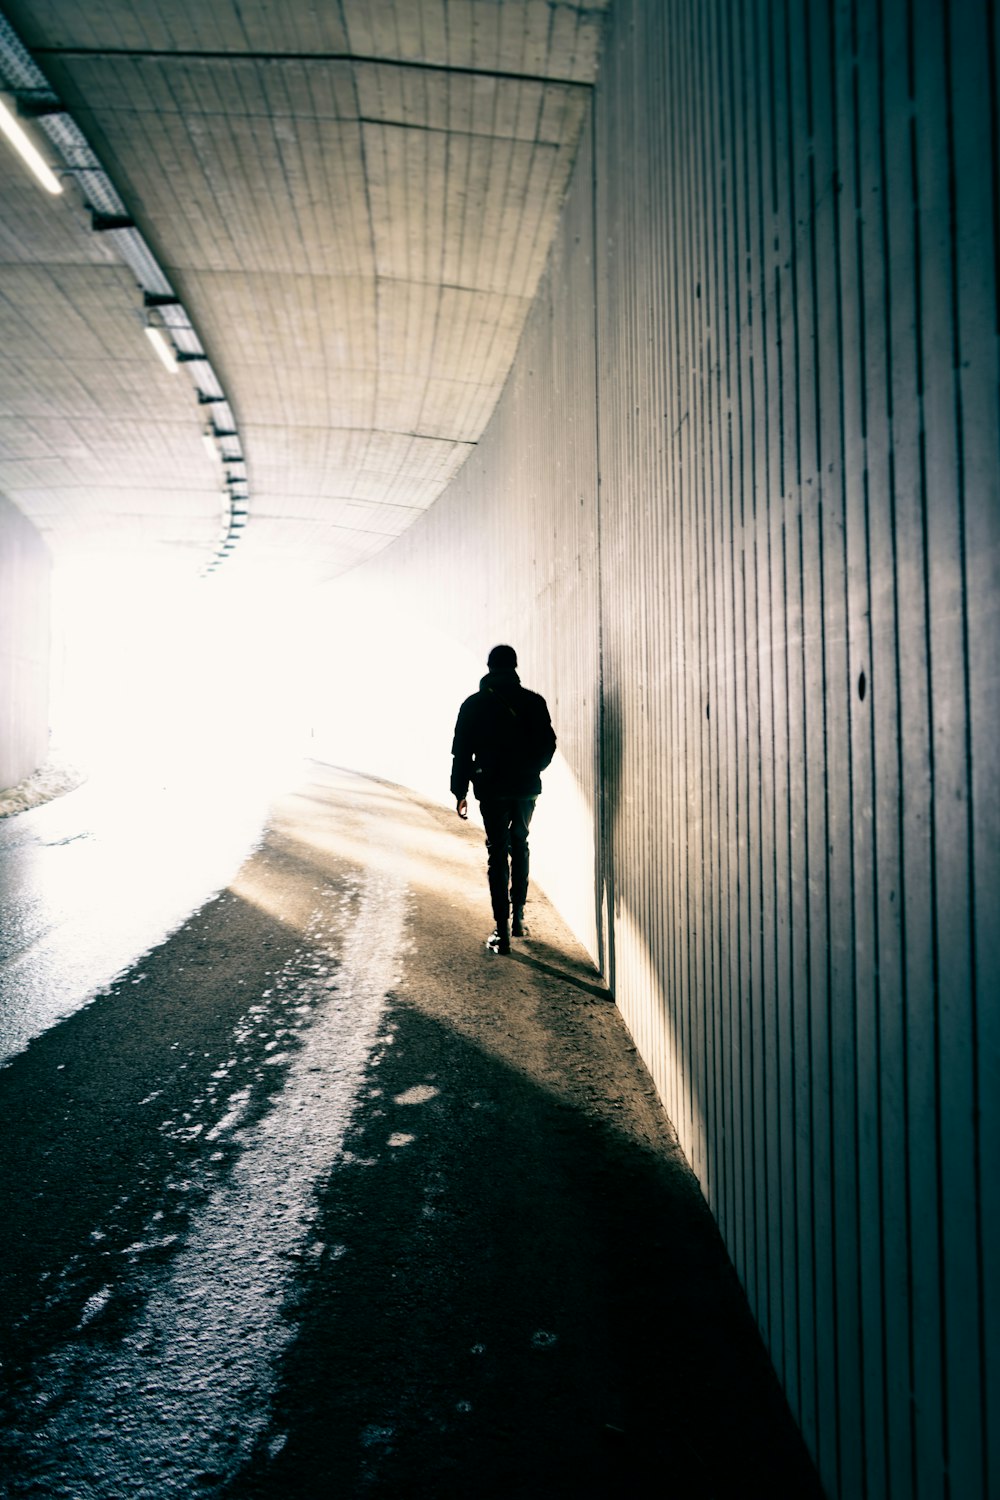 silhouette of person walking on tunnel